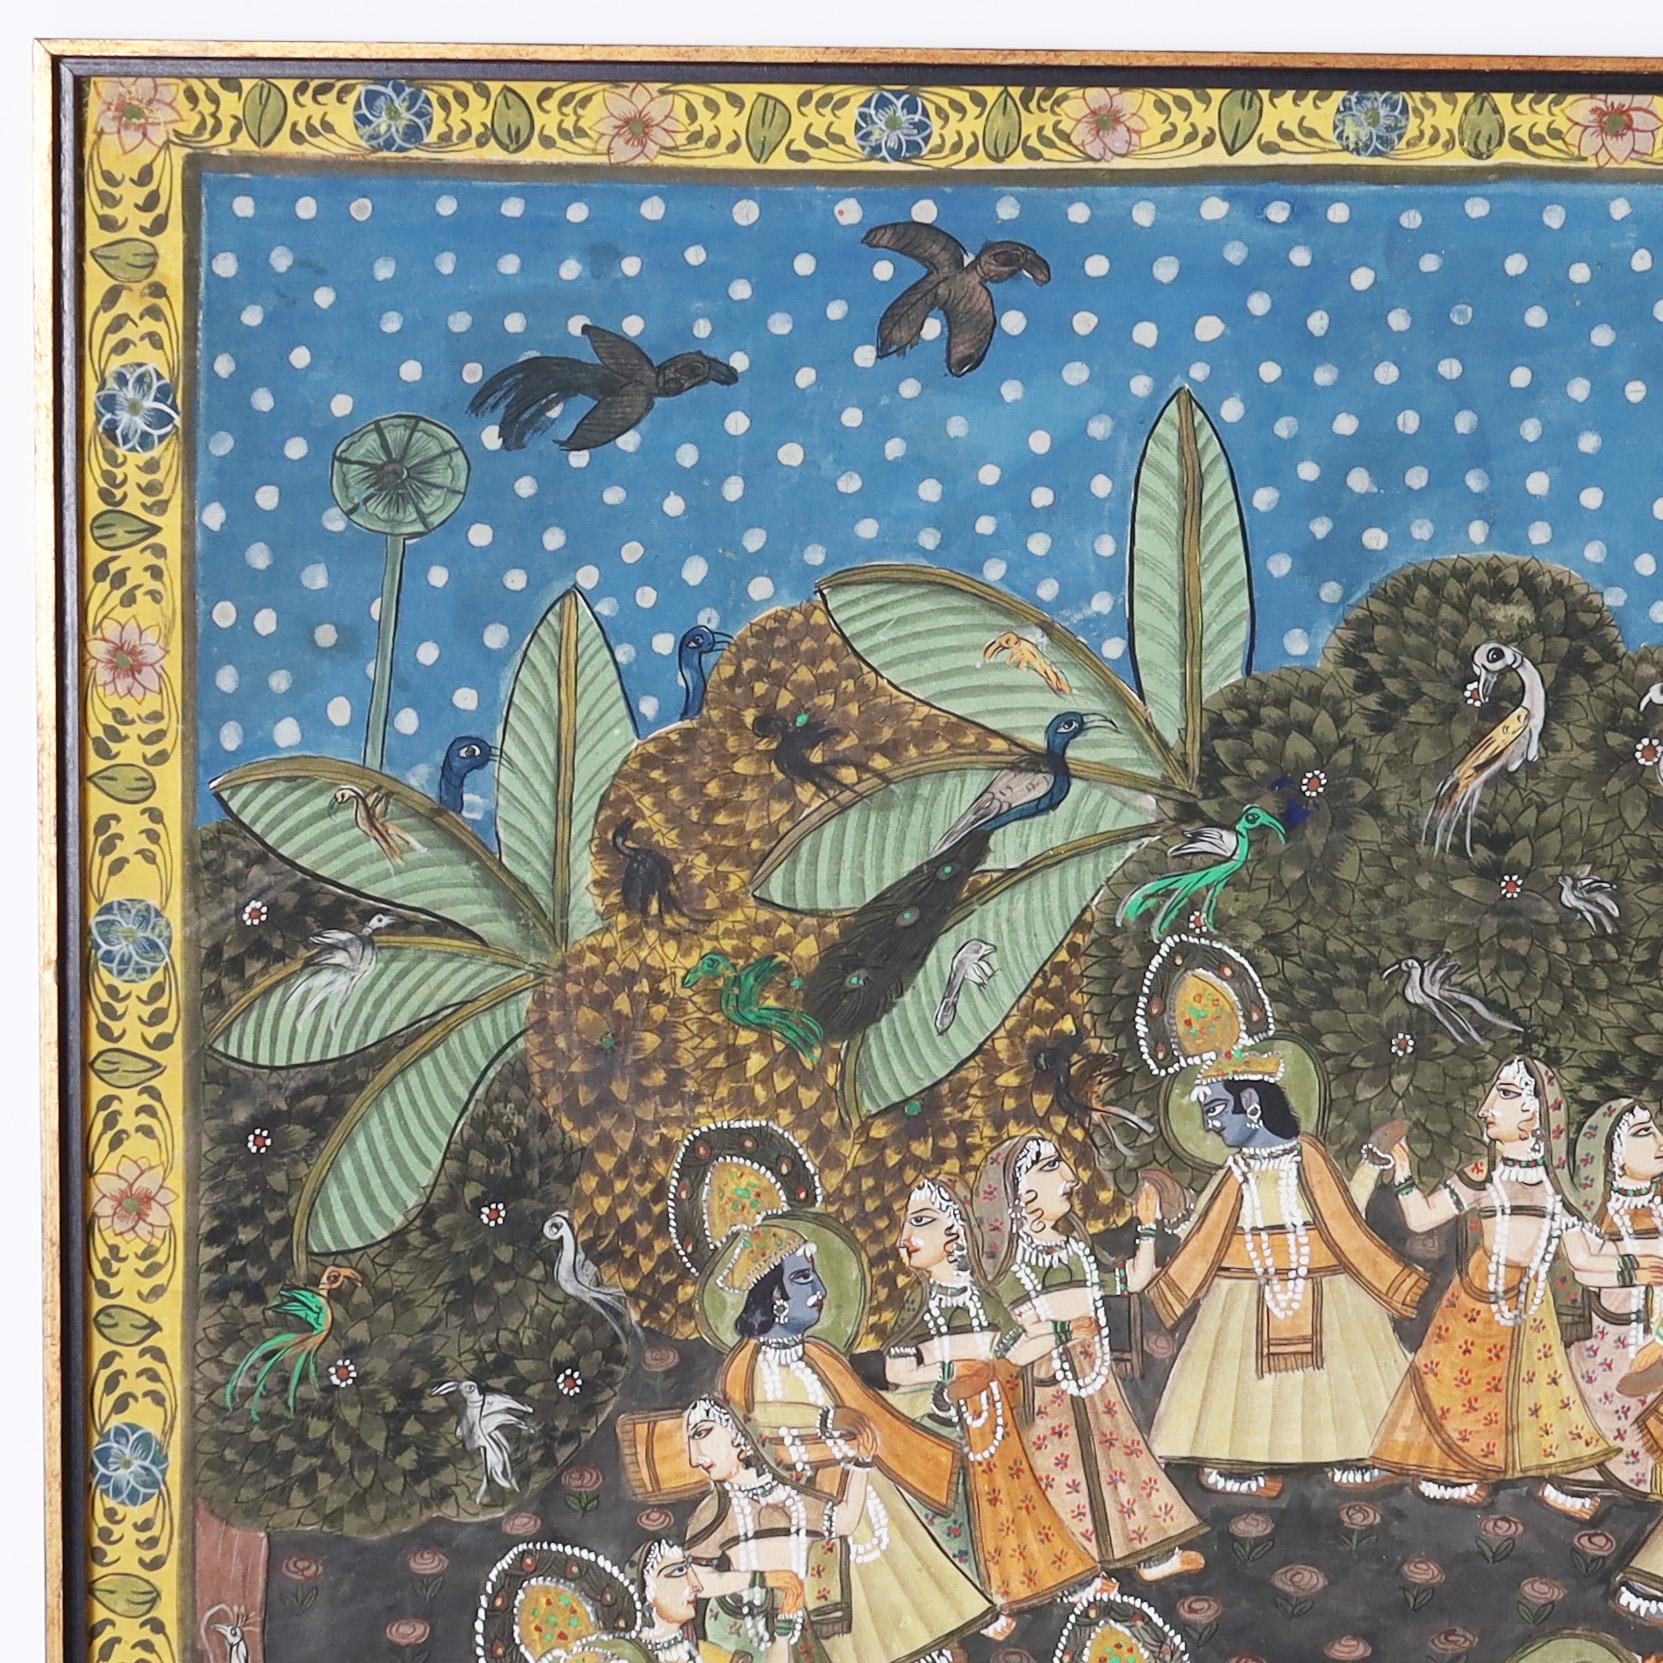 Enchanting vintage Anglo Indian Pishhwai gouache painting on cloth mounted on board, steeped in alagorical context, depicting Krishna dancing with villagers in a background of birds and trees. Presented in the original mahogany frame.